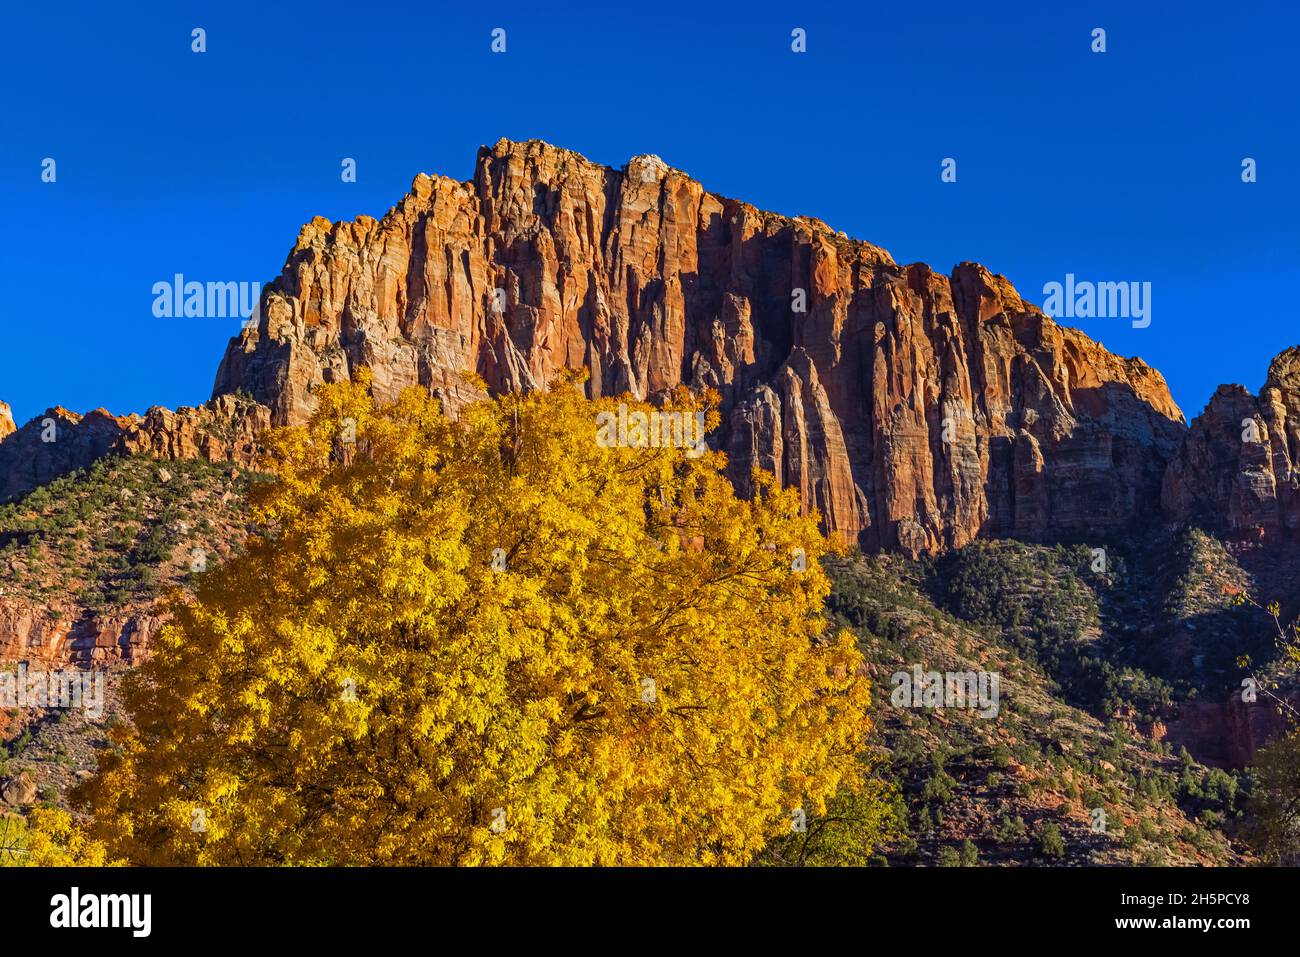 The Watchman formation with the bright yellow leaves of a Desert Ash Tree in Zion National Park, Springdale, Washington County, Utah, USA. Stock Photo